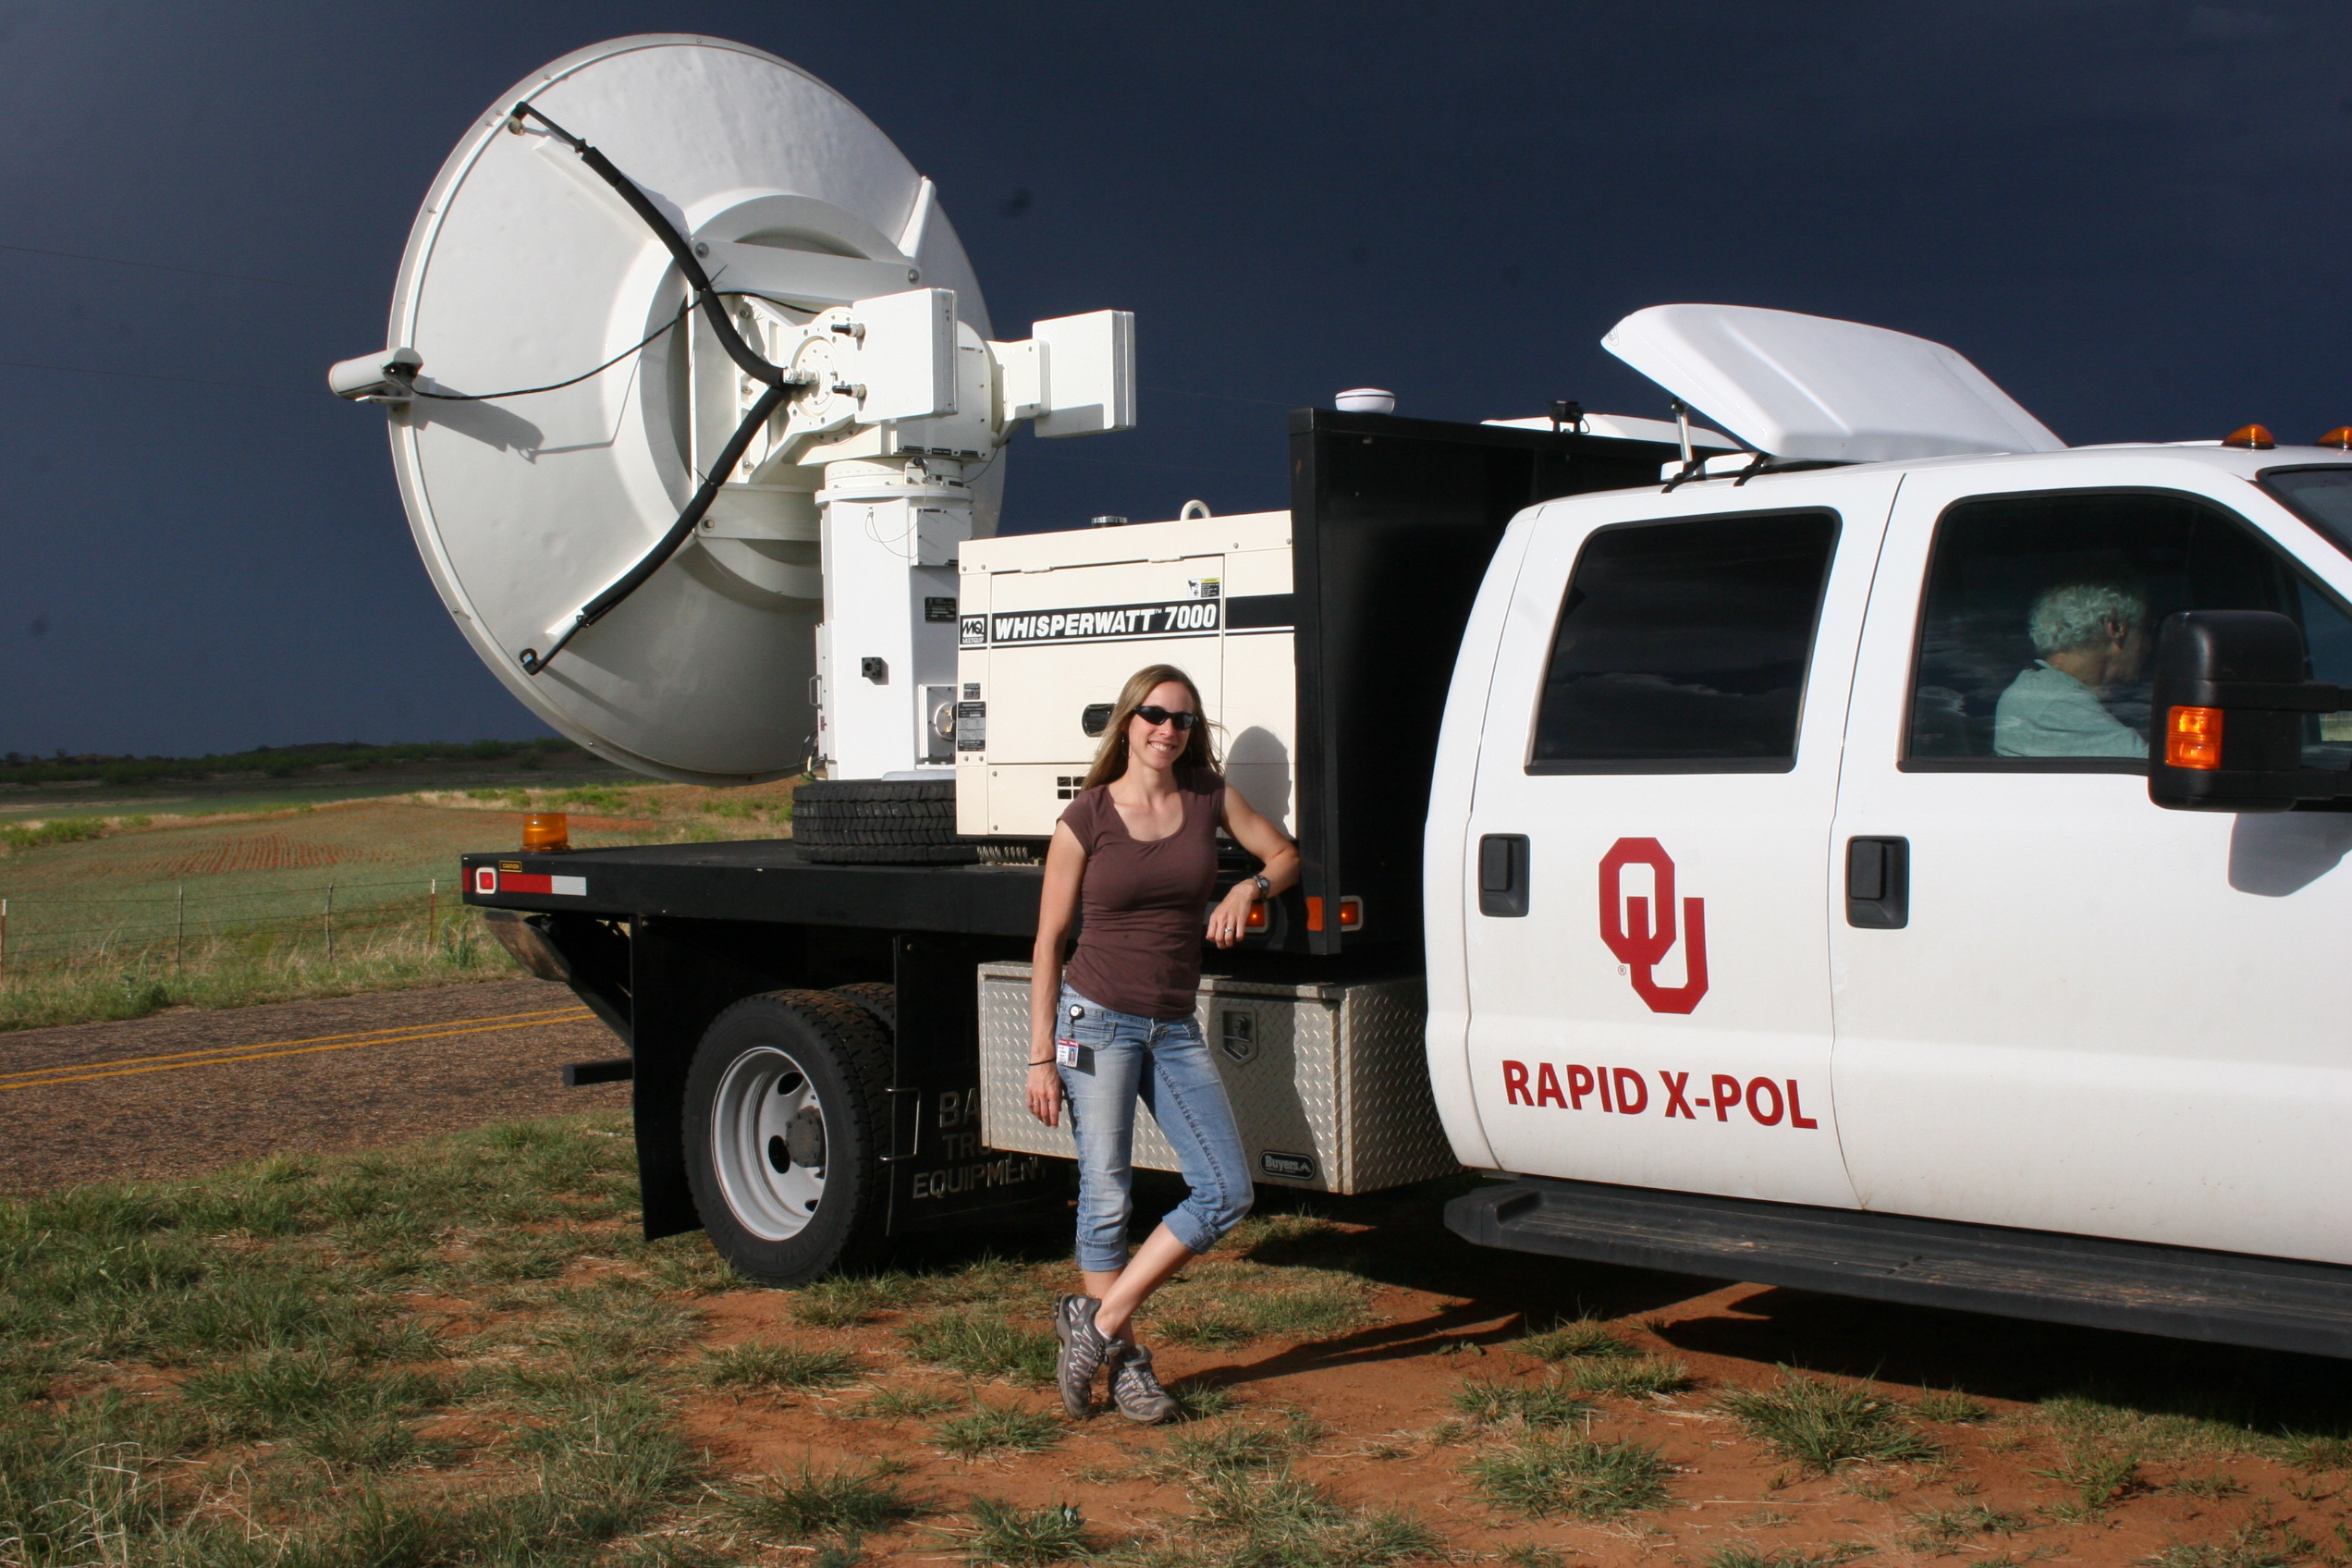 Jana Houser standing next to the RaXPol radar during a storm chase on 8 May 2012.  Credit: Jana Houser.